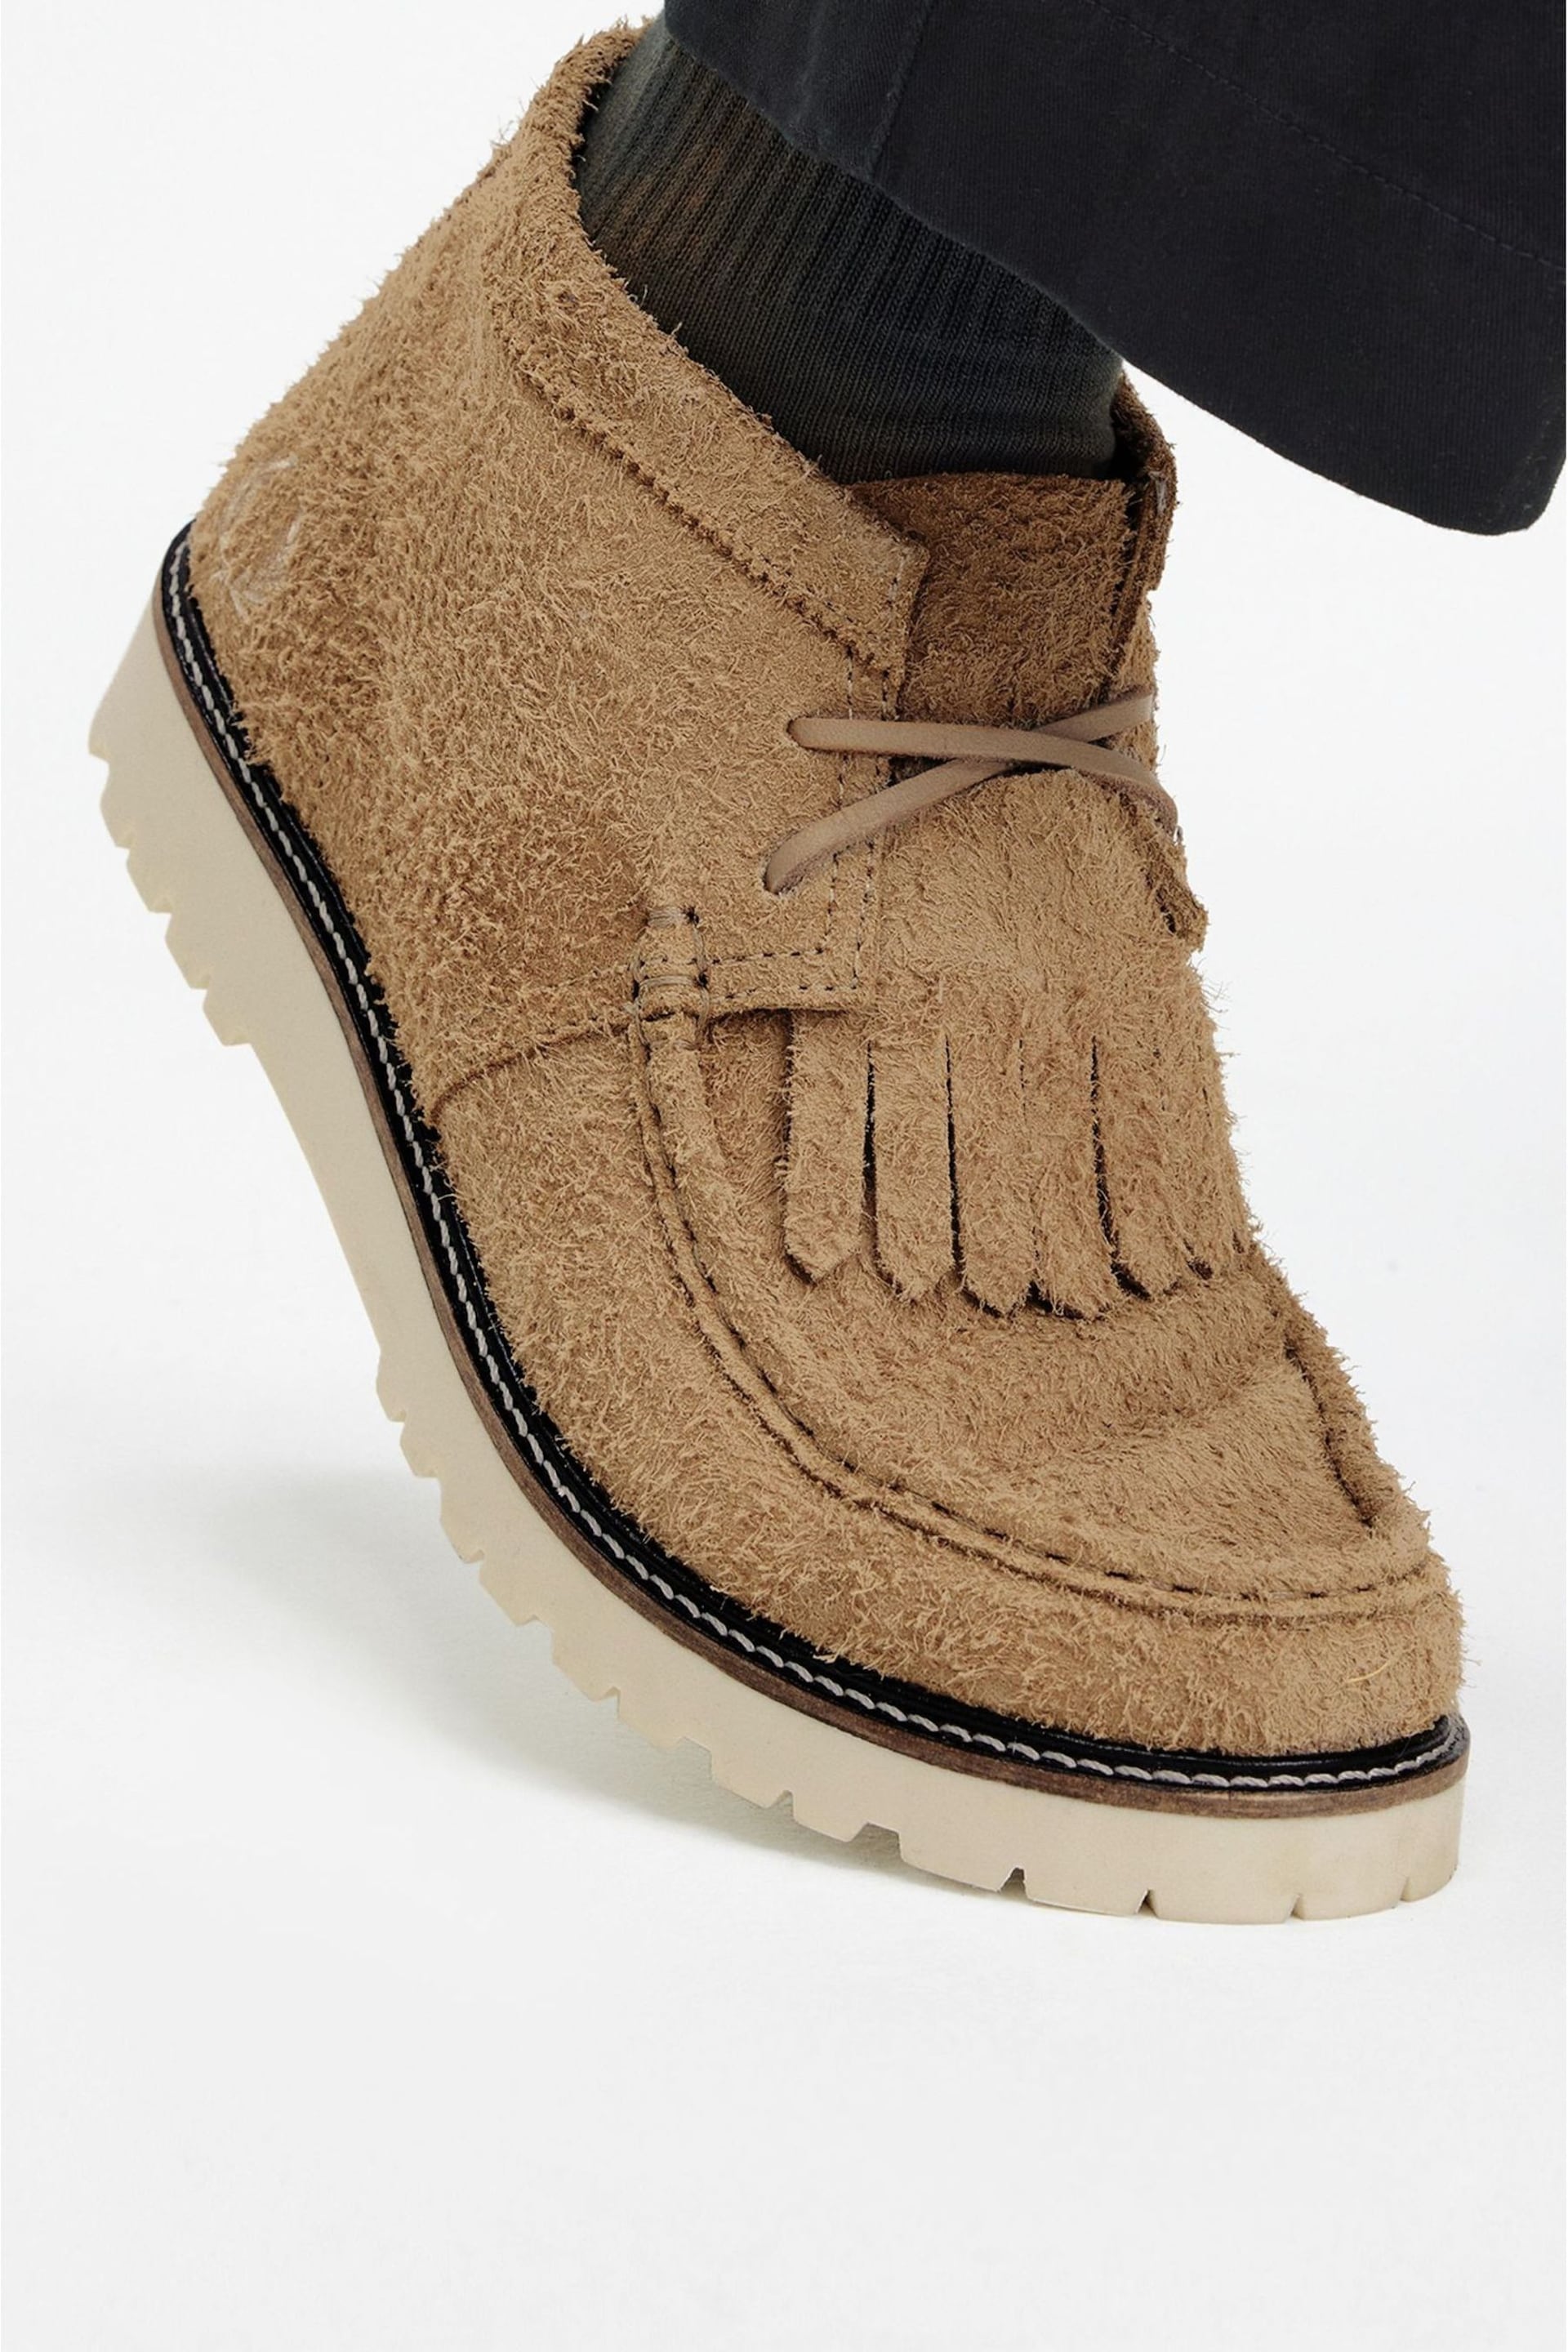 Fred Perry Stone Kenny Boots - Image 7 of 9